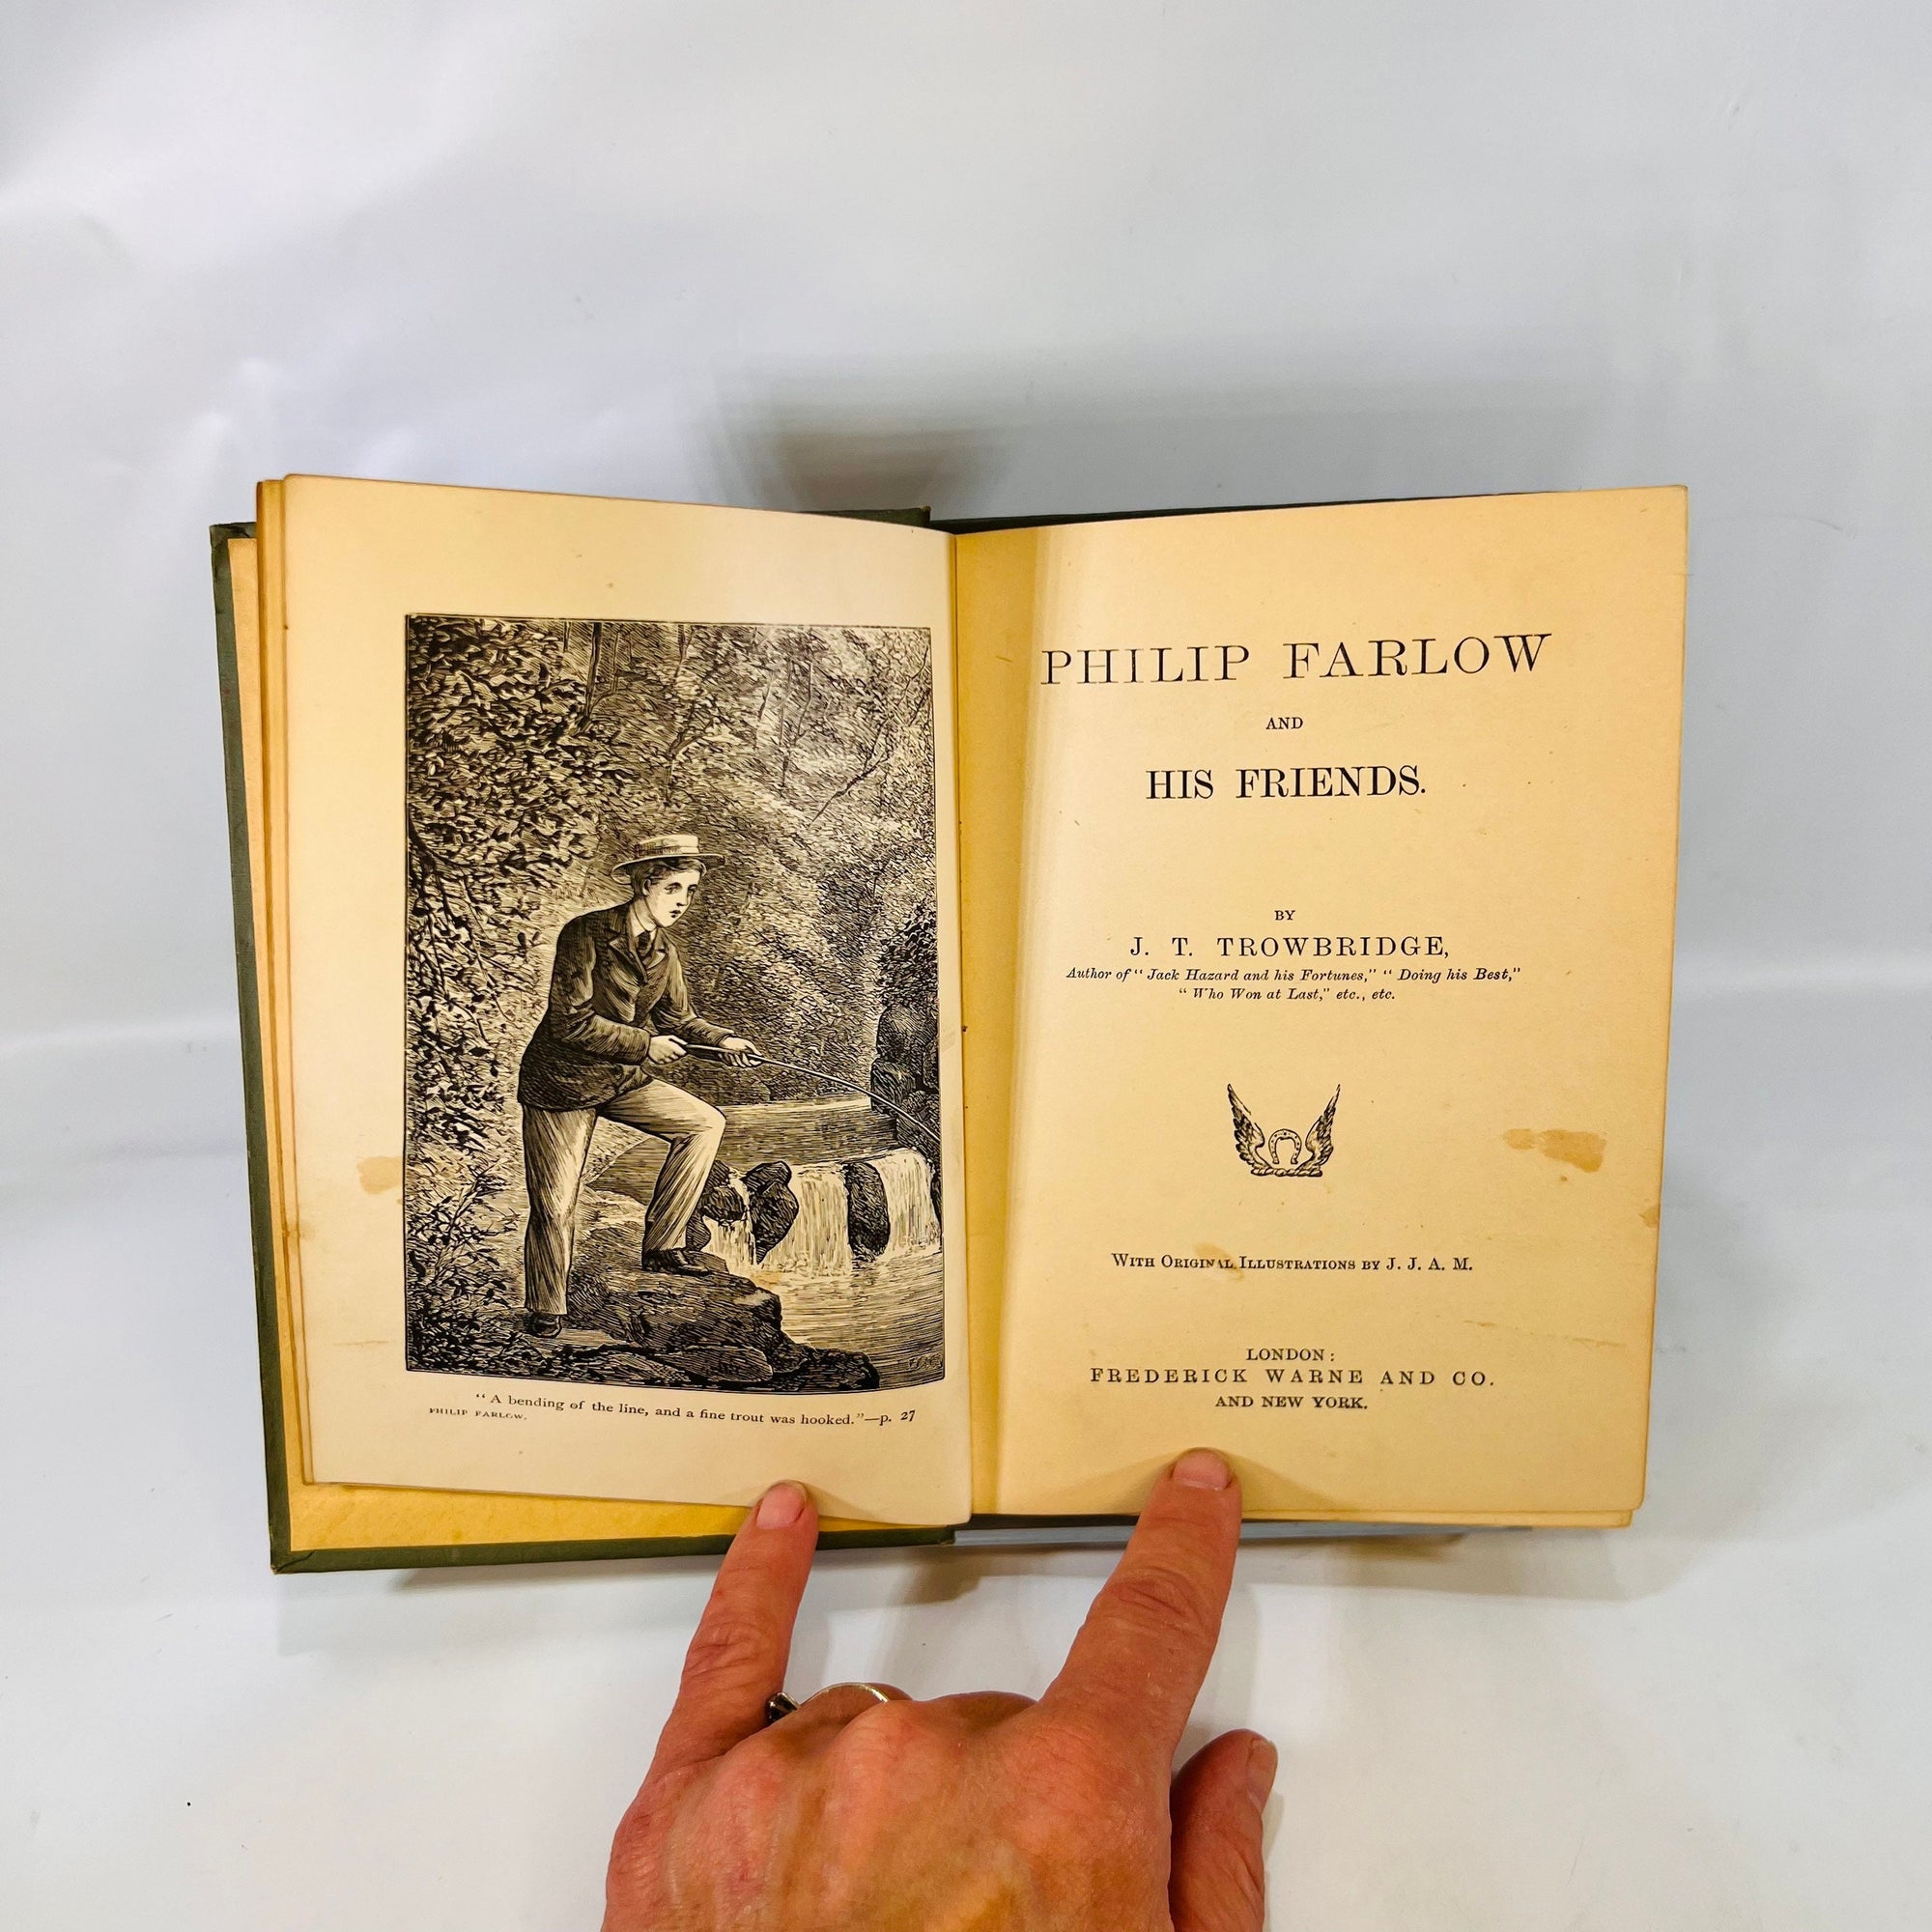 Philip Farlow and his Friends by J.T. Trowbridge Frederick Warne and Co.